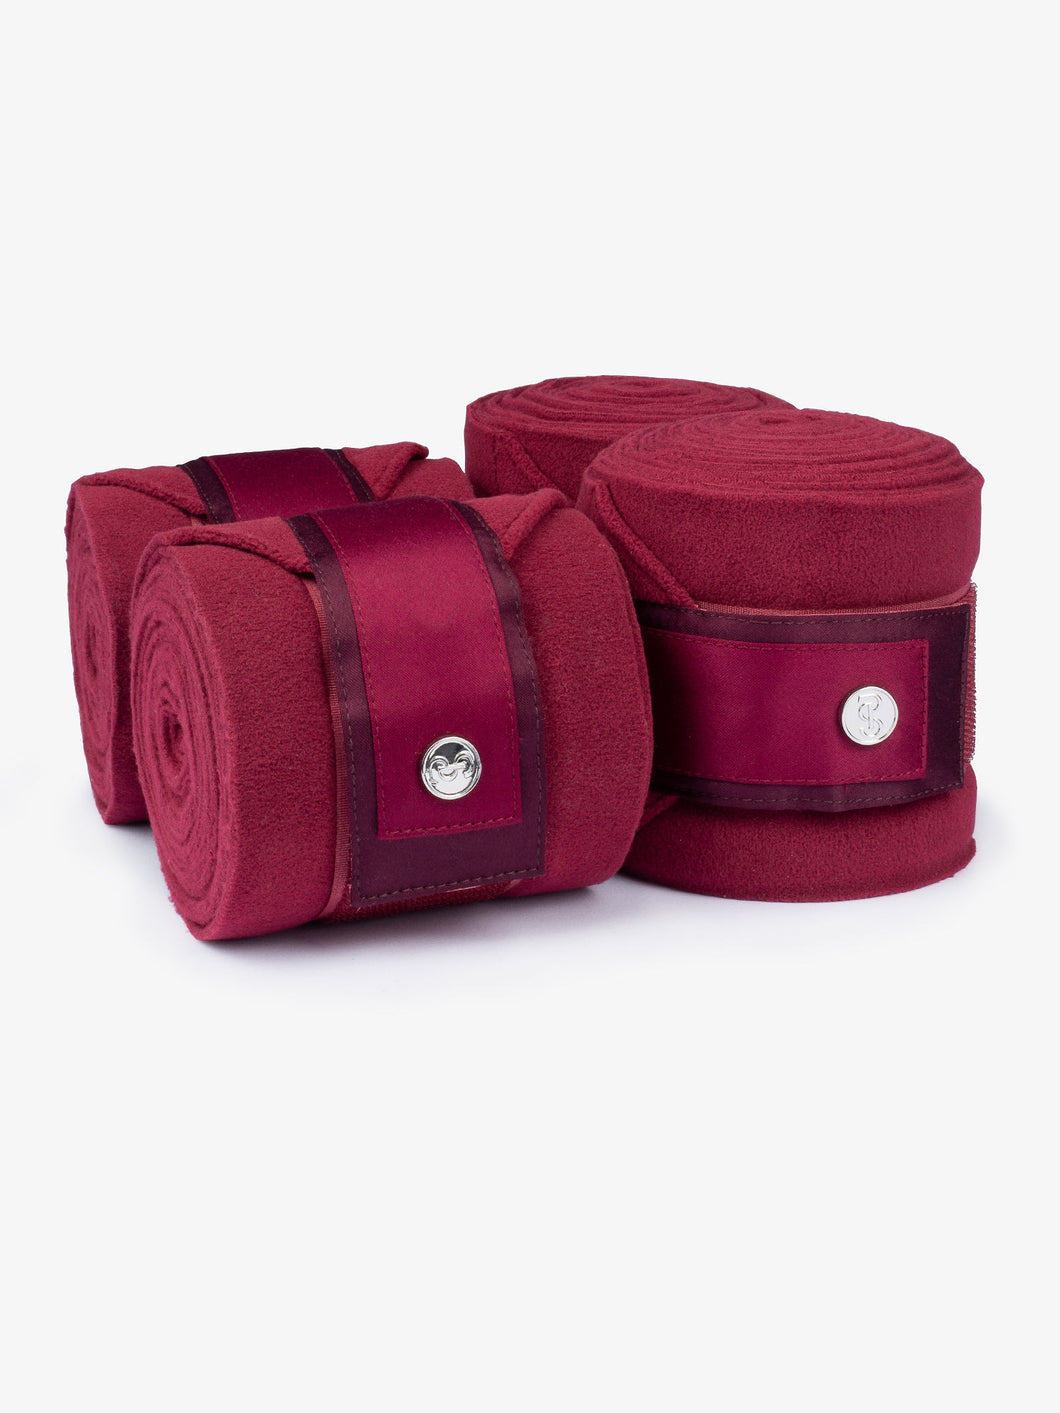 PS Polo Wraps, Signature - Ruby Wine